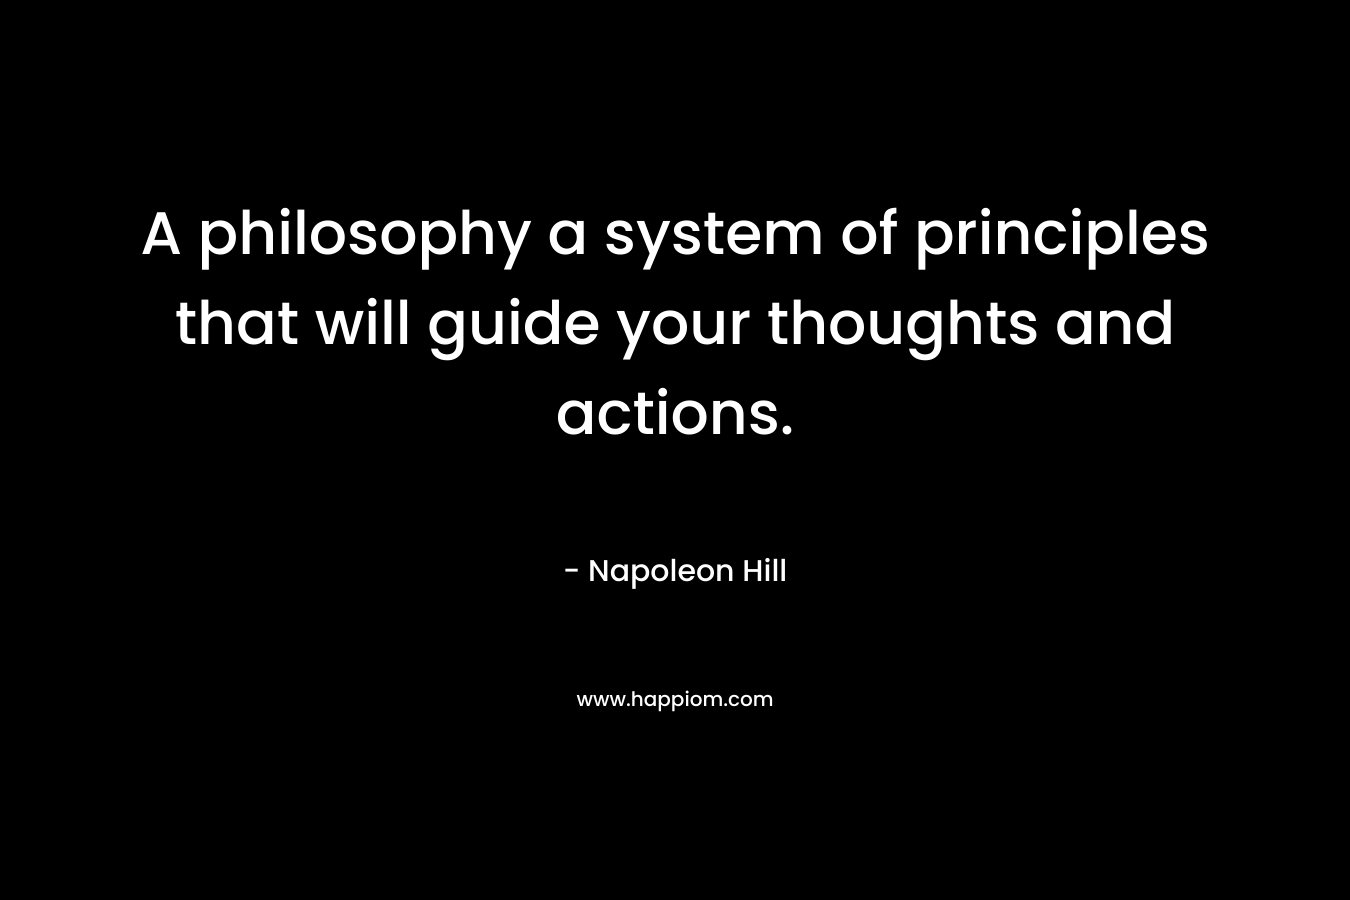 A philosophy a system of principles that will guide your thoughts and actions.